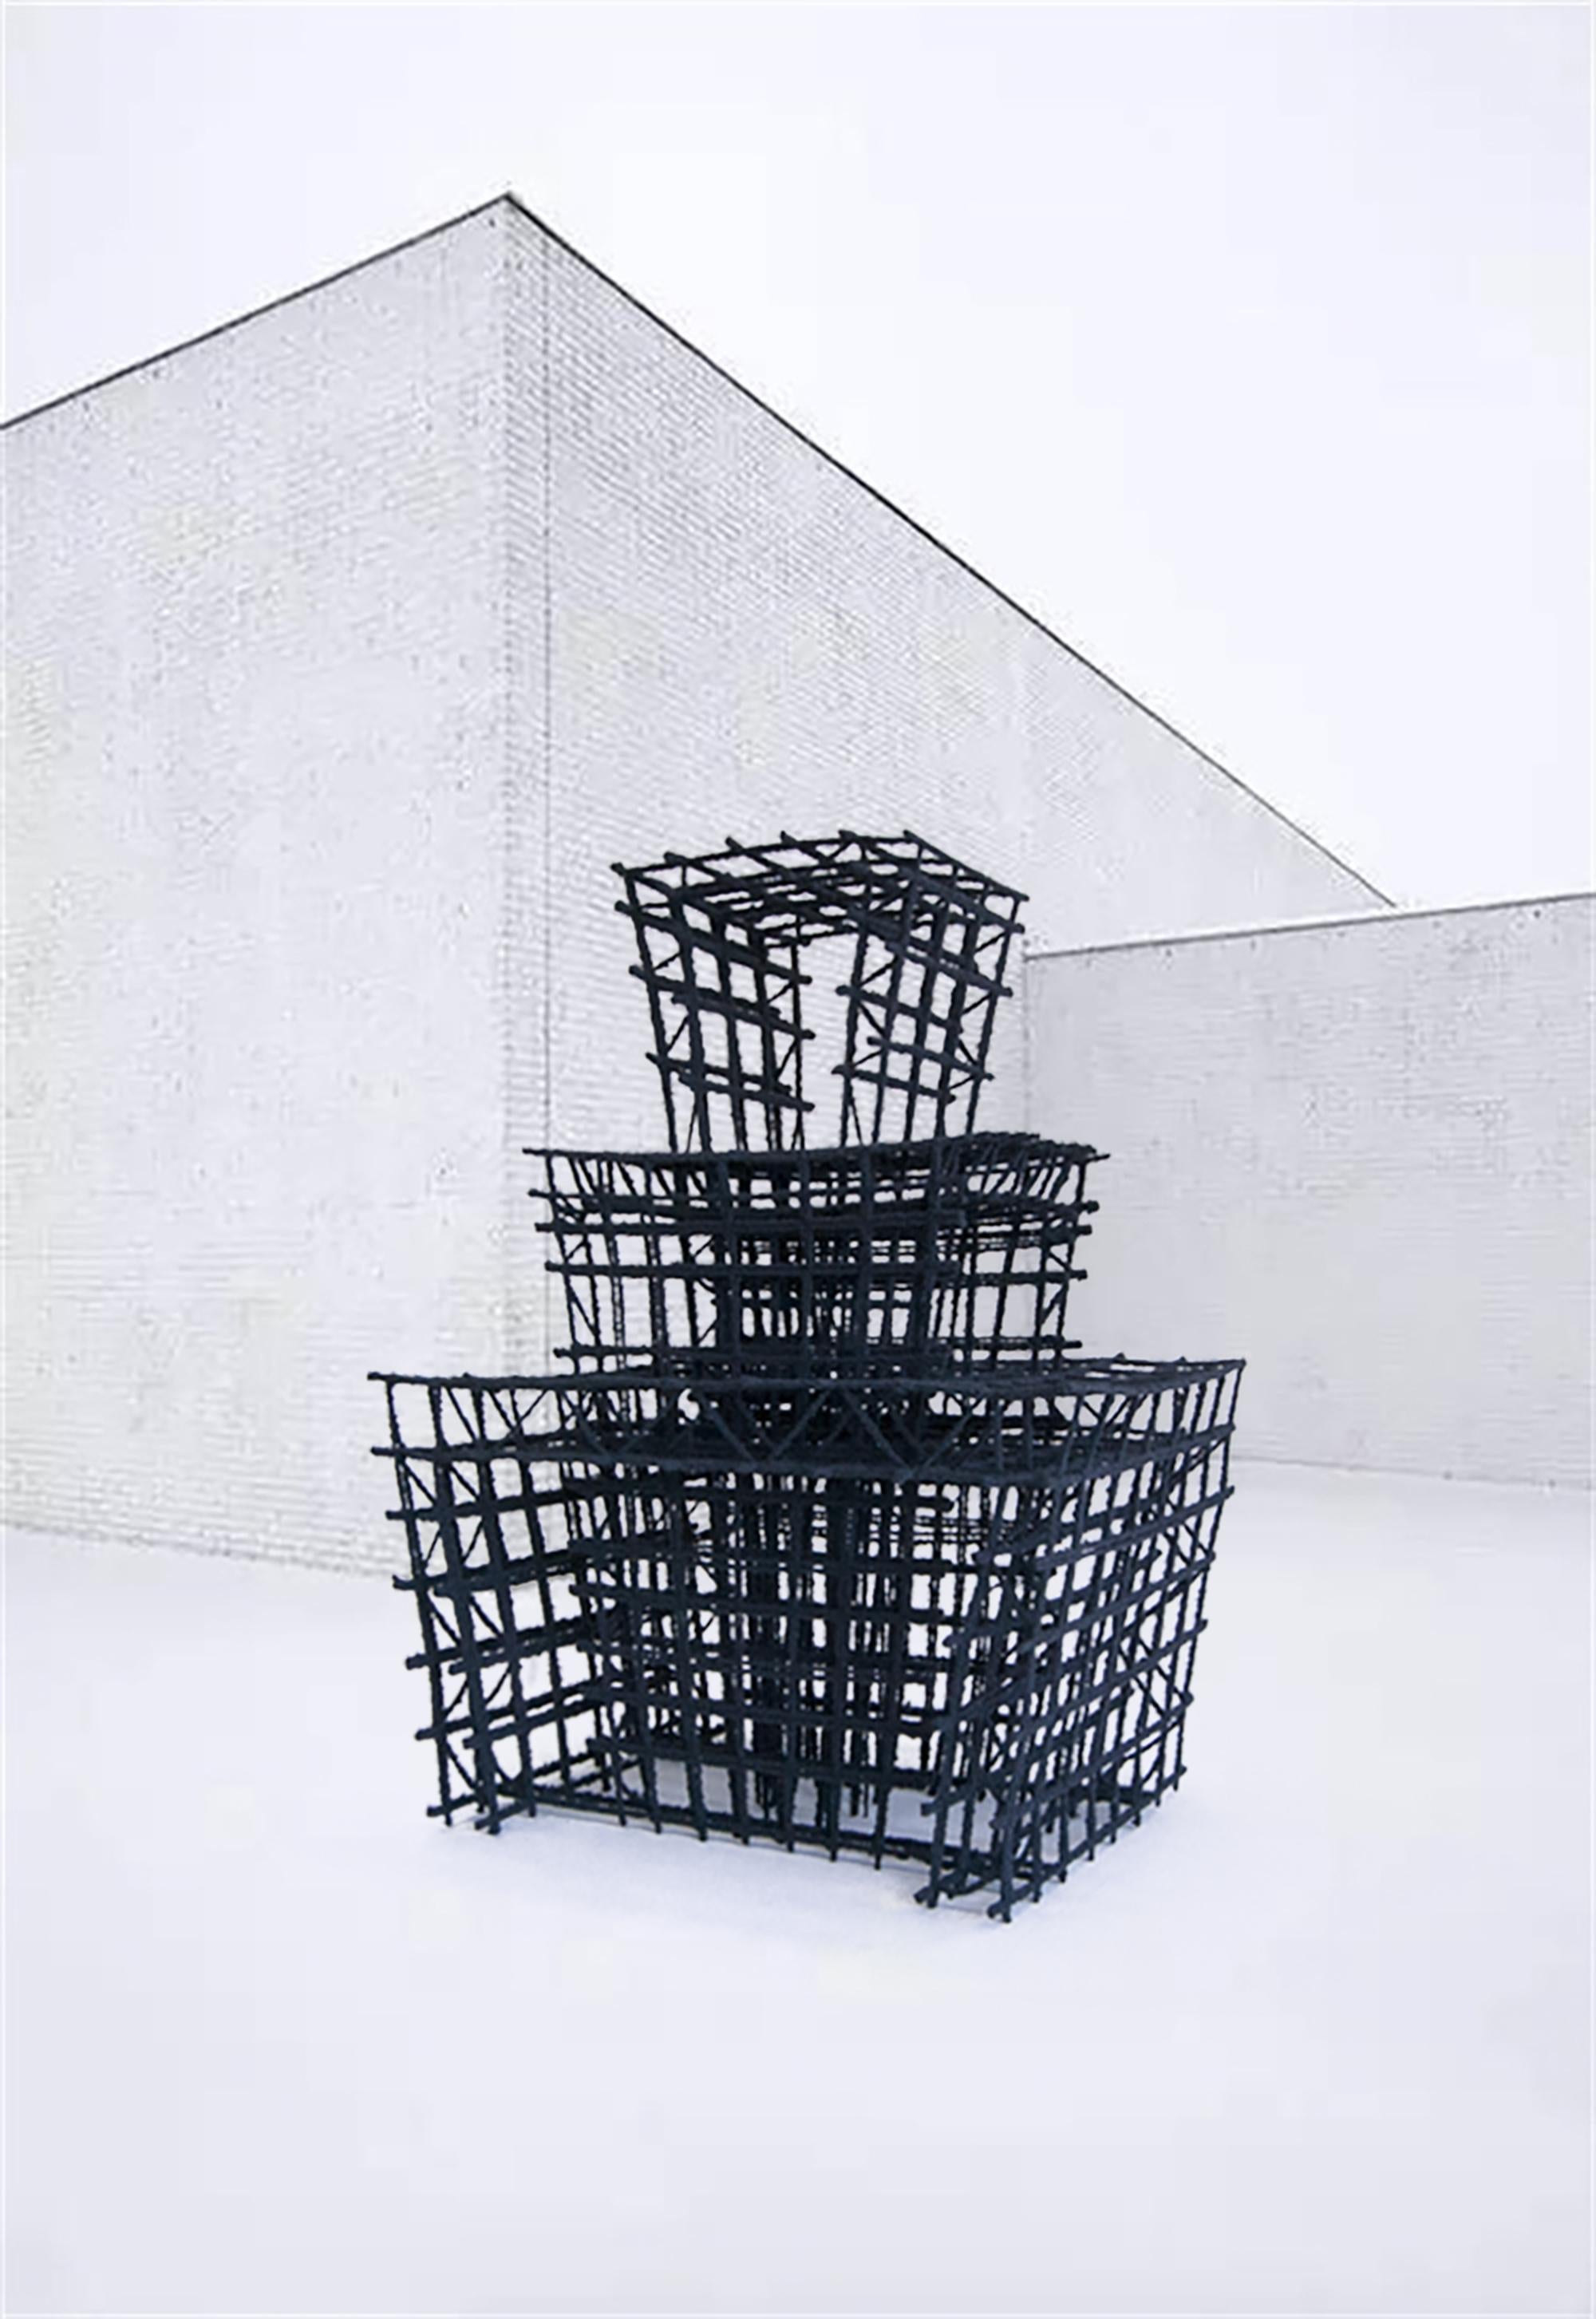 Pagoda anthracite sculpture by Fransje Gimbrere
3D woven standing sculpture
Dimensions: 140 x 100 x 70 cm
Materials: Glass fibre recycled paper, biodegradeable glue

Fransje Gimbrère is a multidisciplinary designer and art director, born and